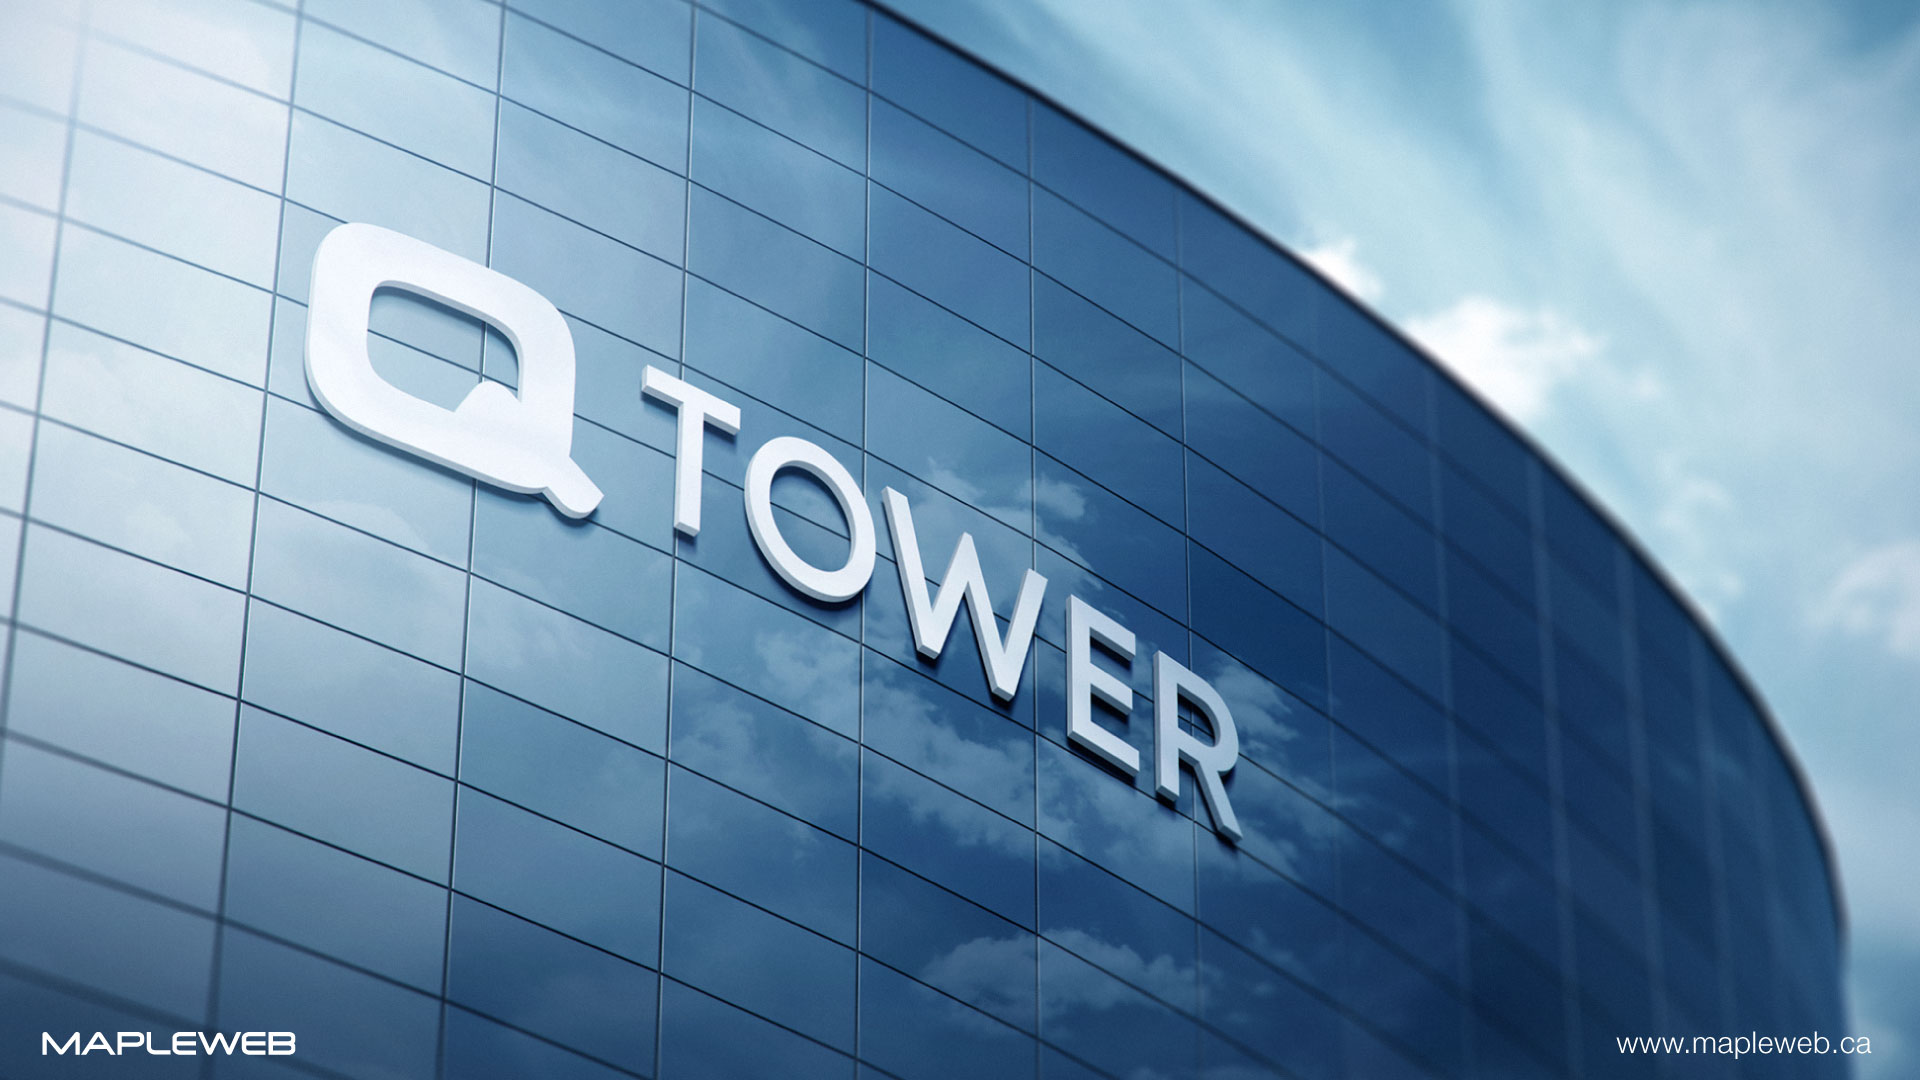 q-tower-brand-logo-design-by-mapleweb-vancouver-canada-black-building-mock